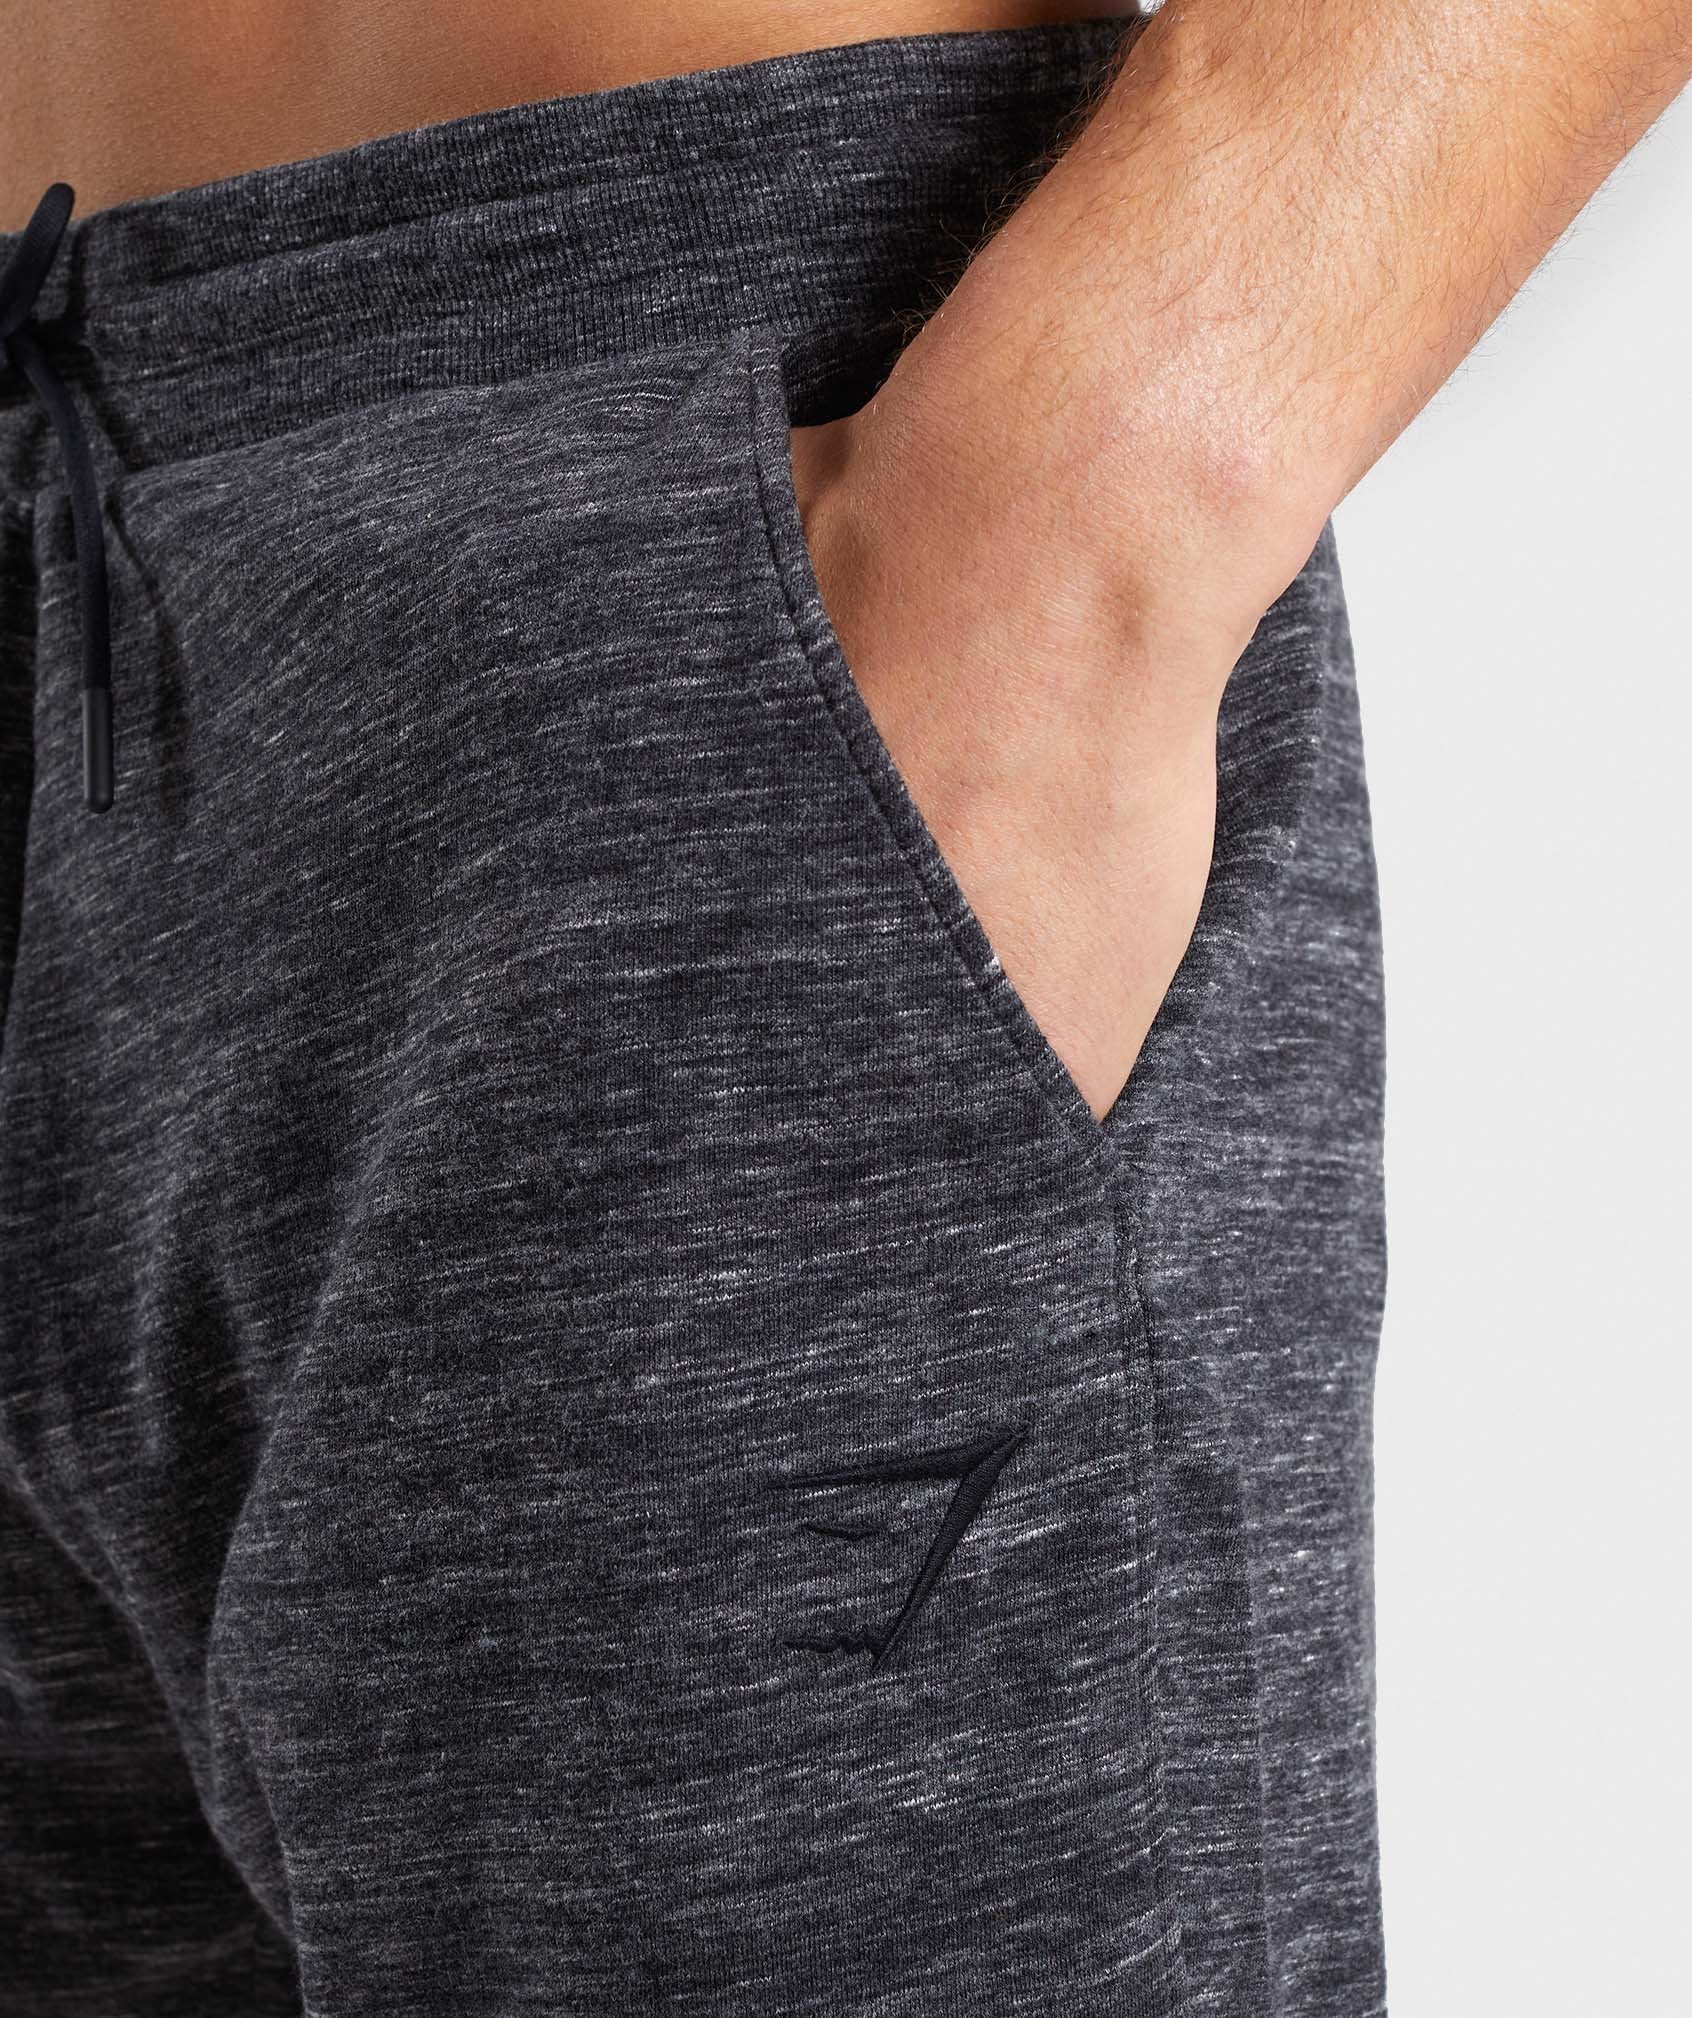 Lounge Shorts in Charcoal Marl - view 5